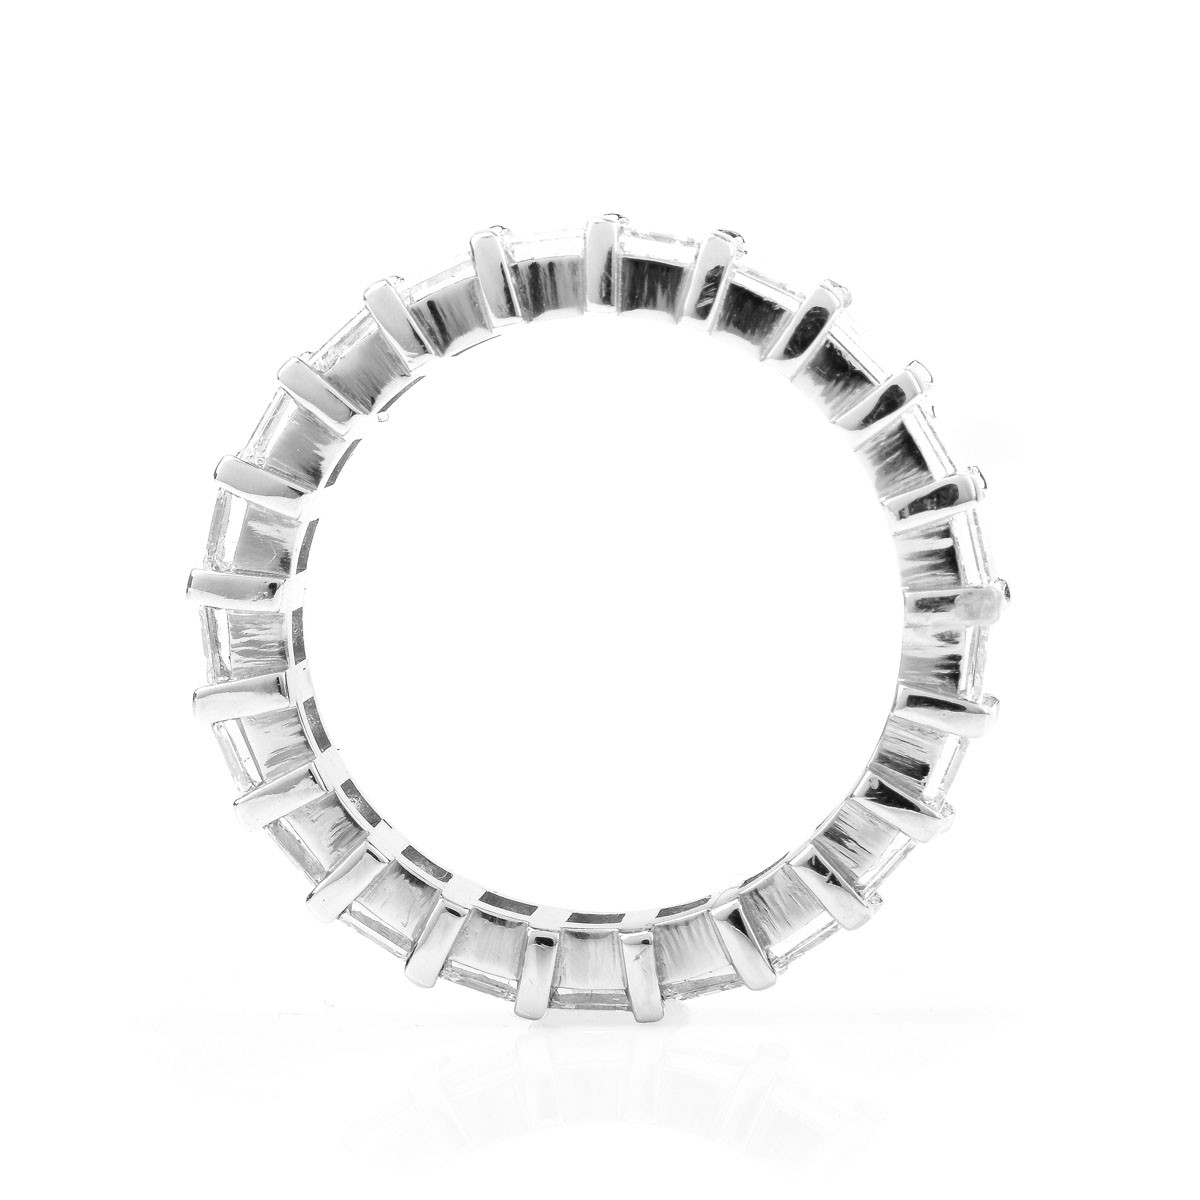 Approx. 3.90 Carat Asher Cut Diamond and Platinum Eternity Band.